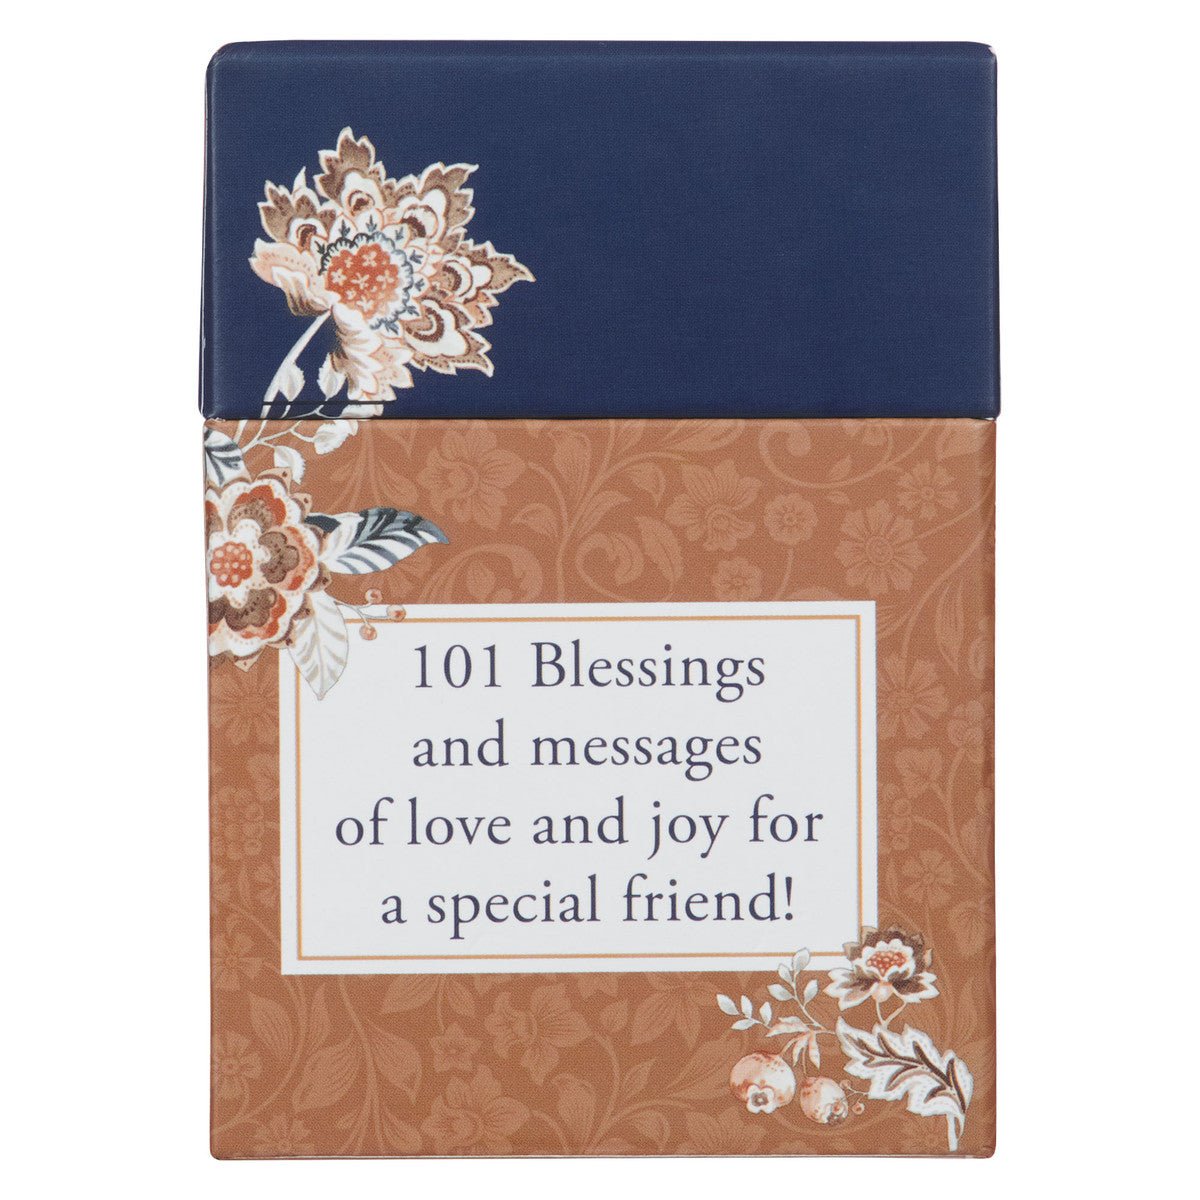 101 Blessings for a Precious Friend Box of Blessings | 2FruitBearers